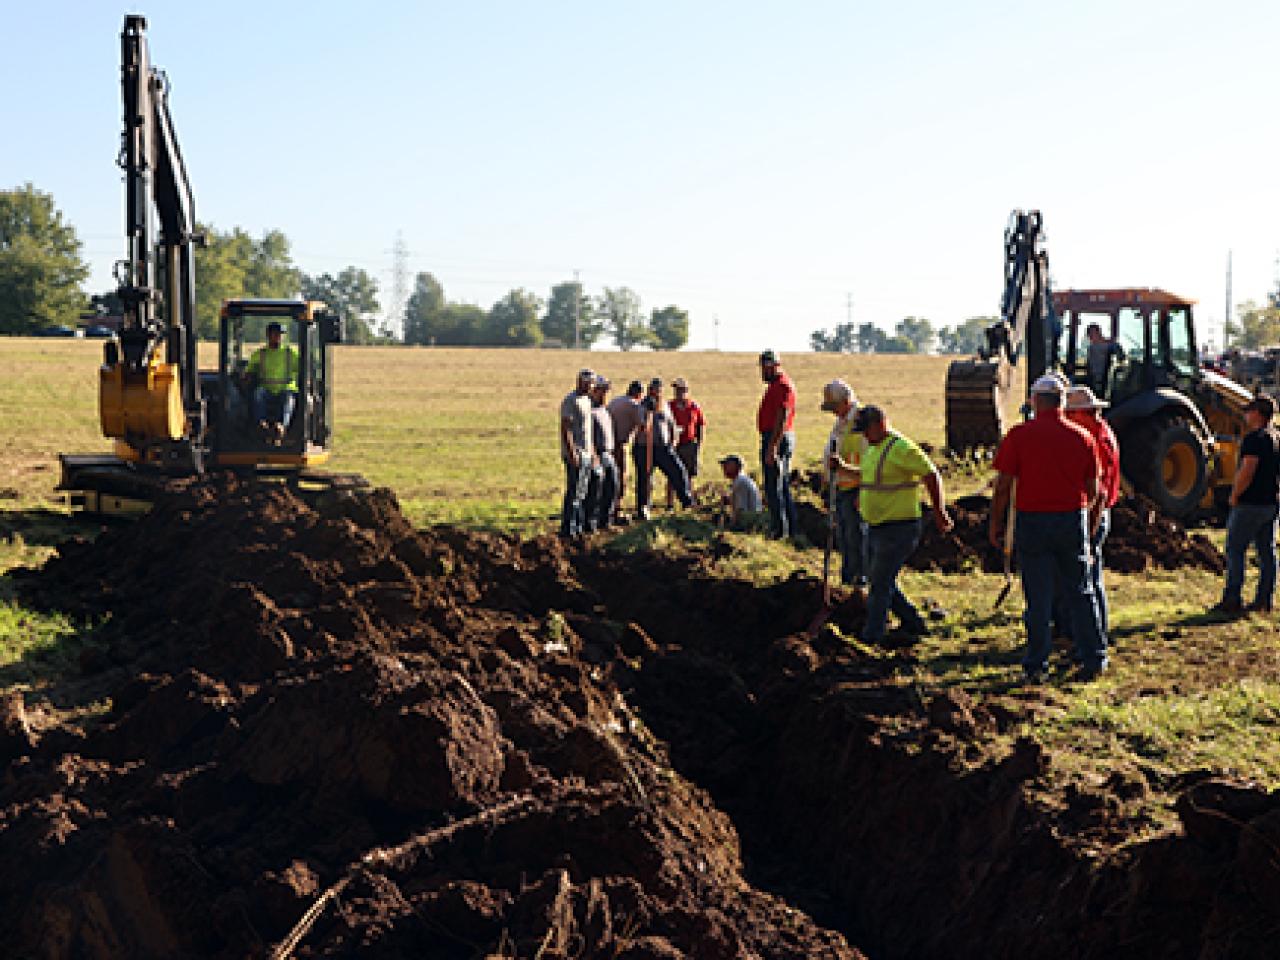 Heavy equipment digs drainage ditches in a field with spectactors looking on